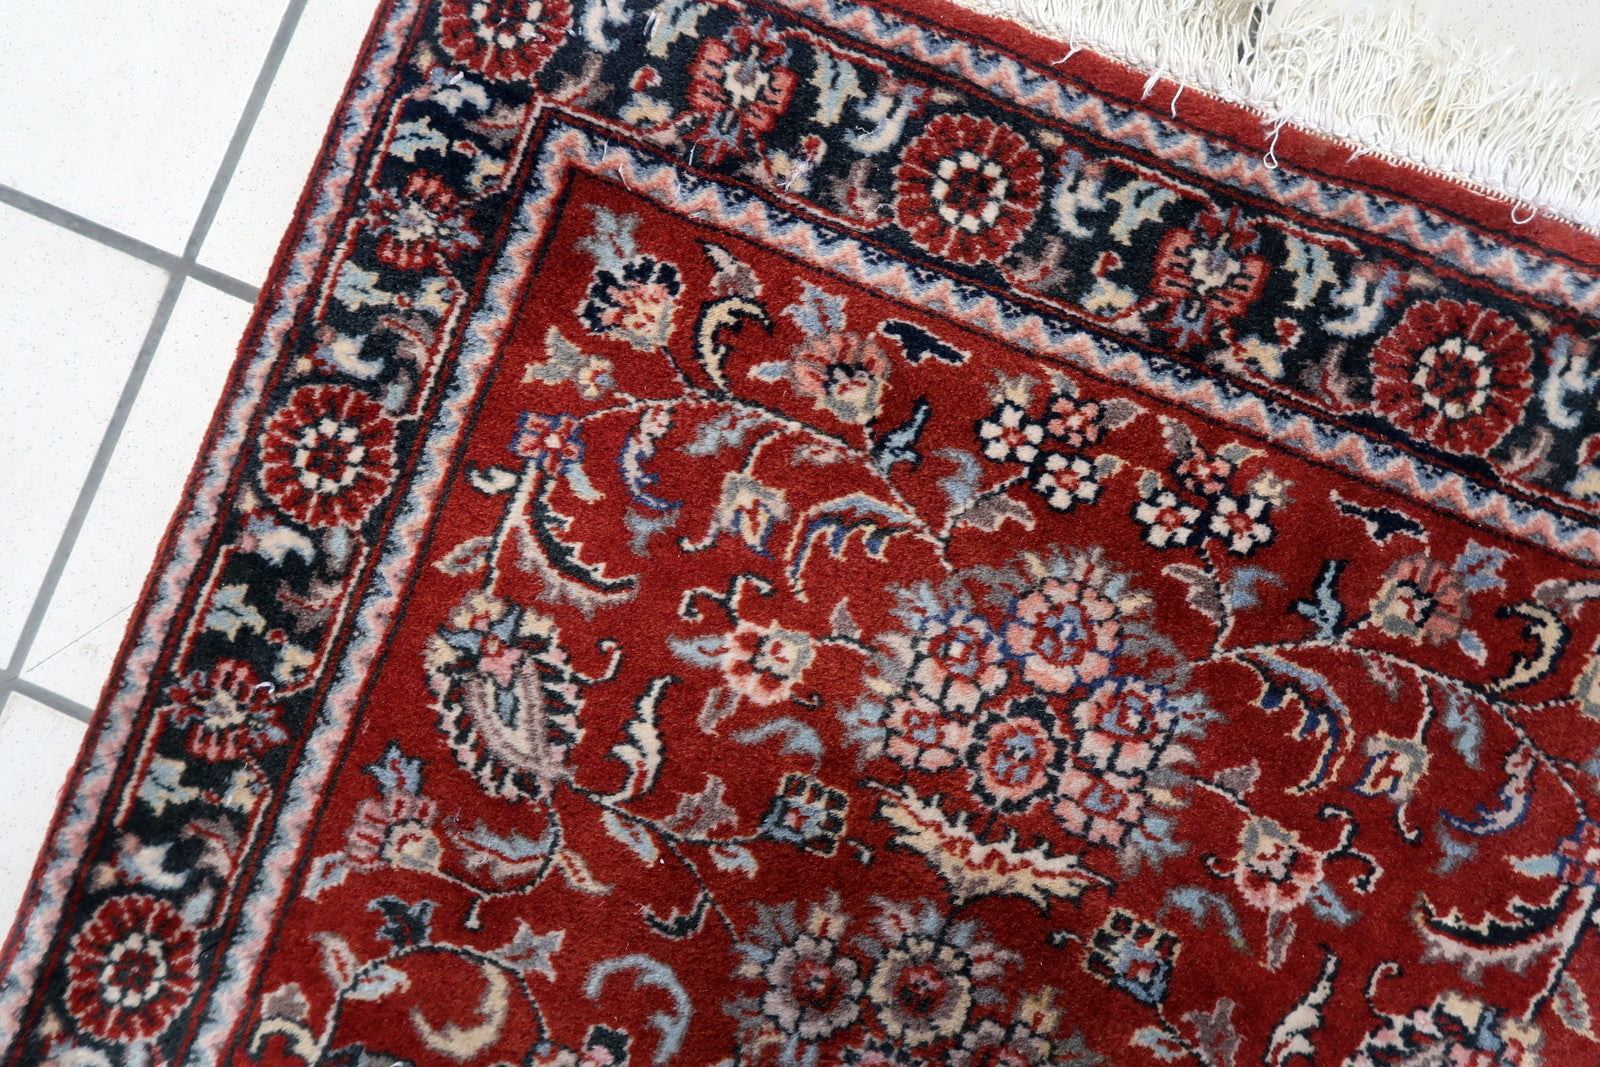 Side view of the small rectangular rug made from durable wool fibers